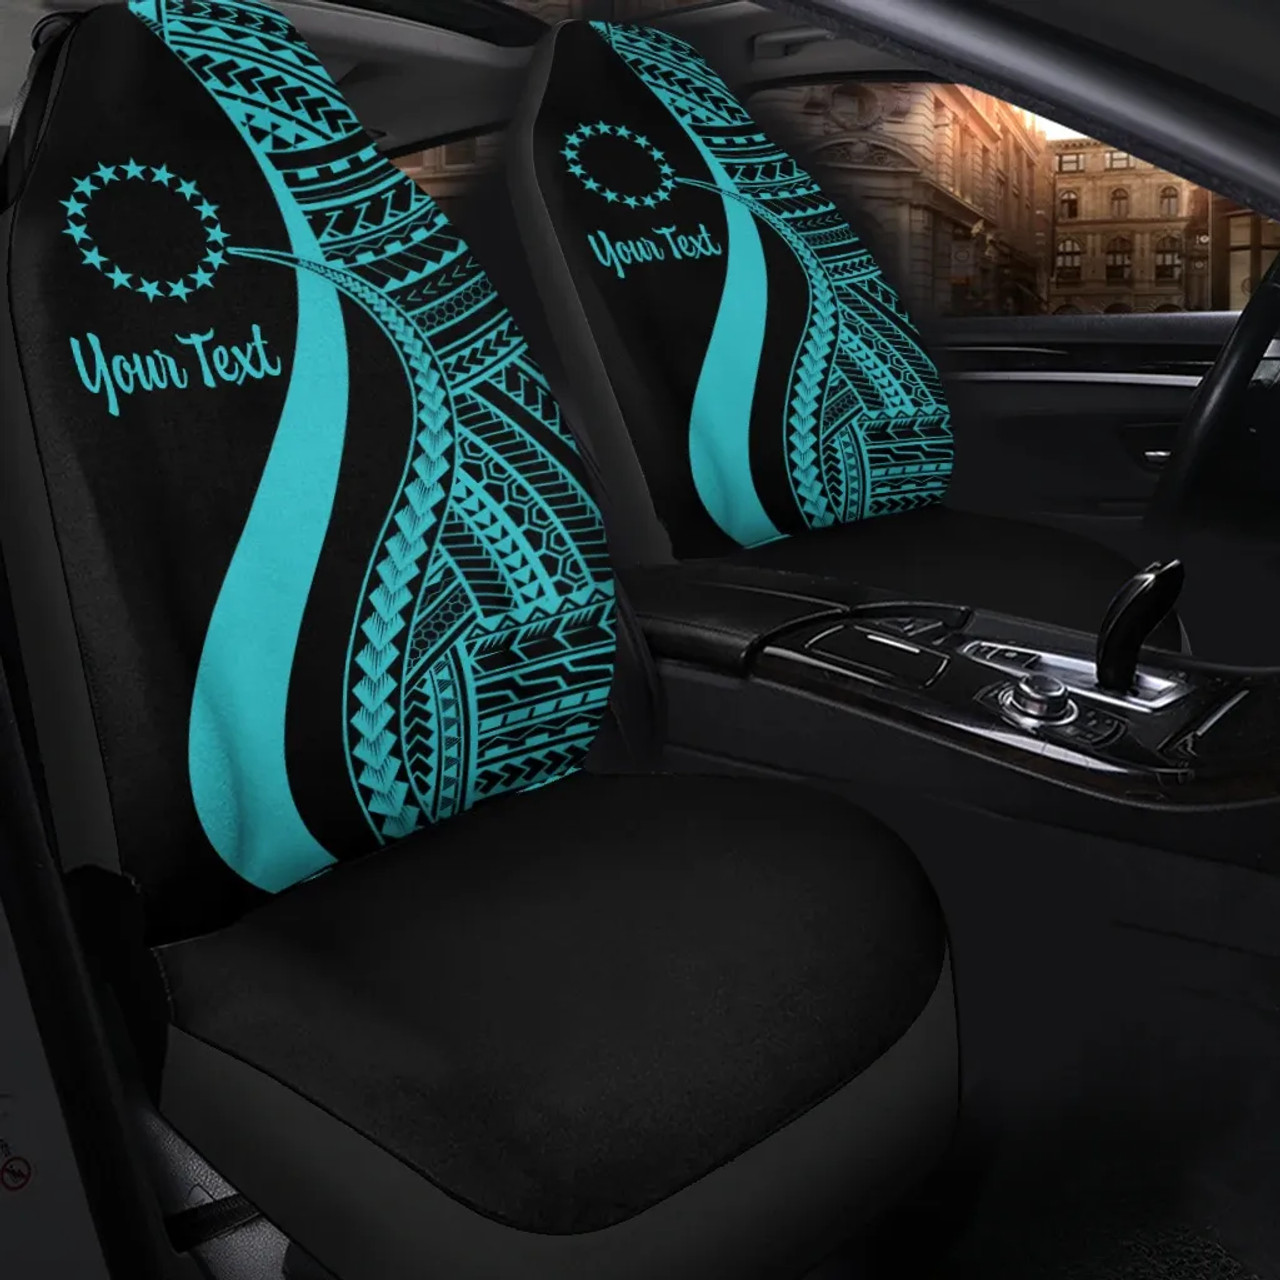 Cook Islands Custom Personalised Car Seat Covers - Turquoise Polynesian Tentacle Tribal Pattern